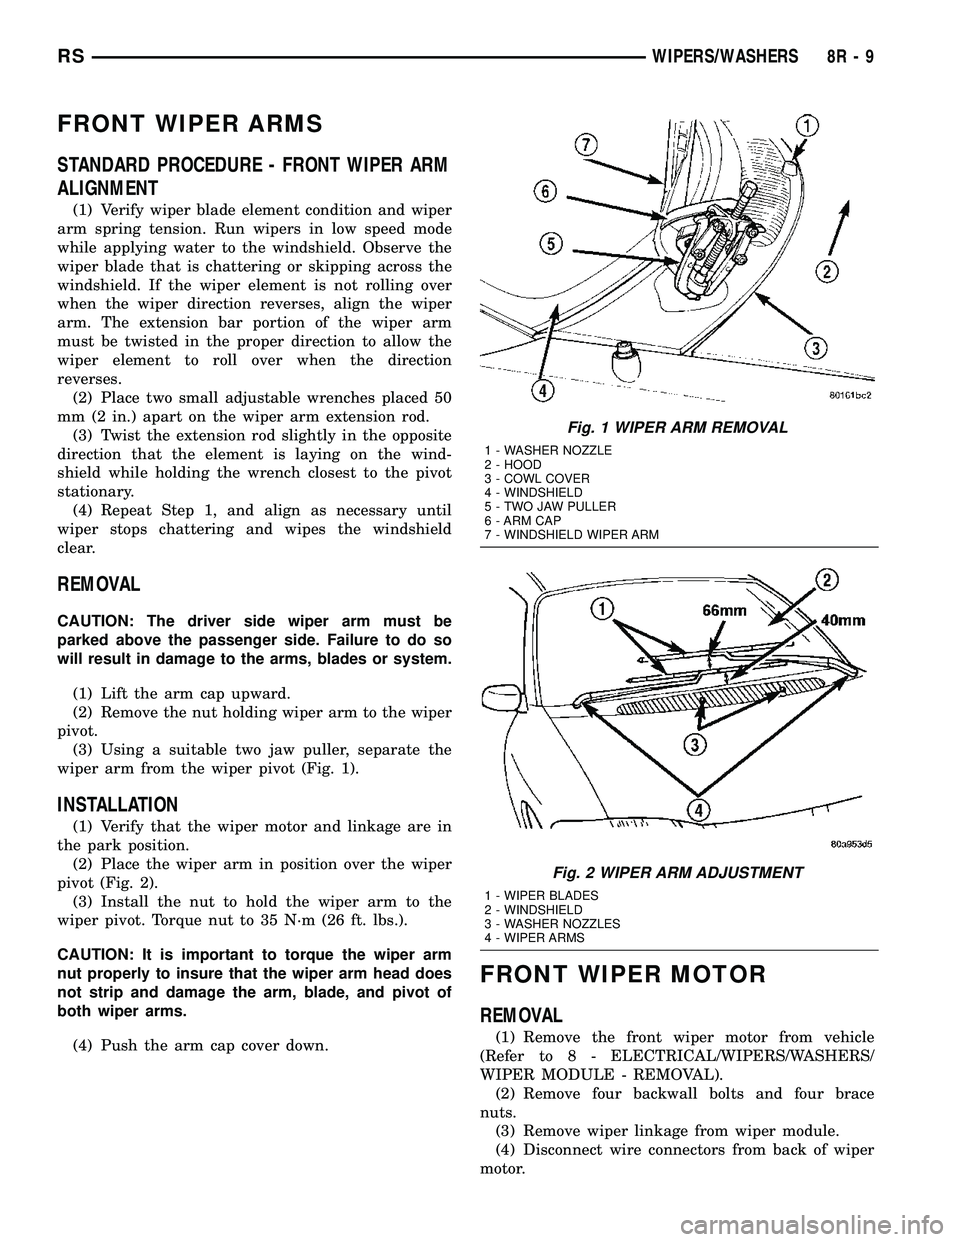 CHRYSLER VOYAGER 2005  Service Manual FRONT WIPER ARMS
STANDARD PROCEDURE - FRONT WIPER ARM
ALIGNMENT
(1) Verify wiper blade element condition and wiper
arm spring tension. Run wipers in low speed mode
while applying water to the windshie